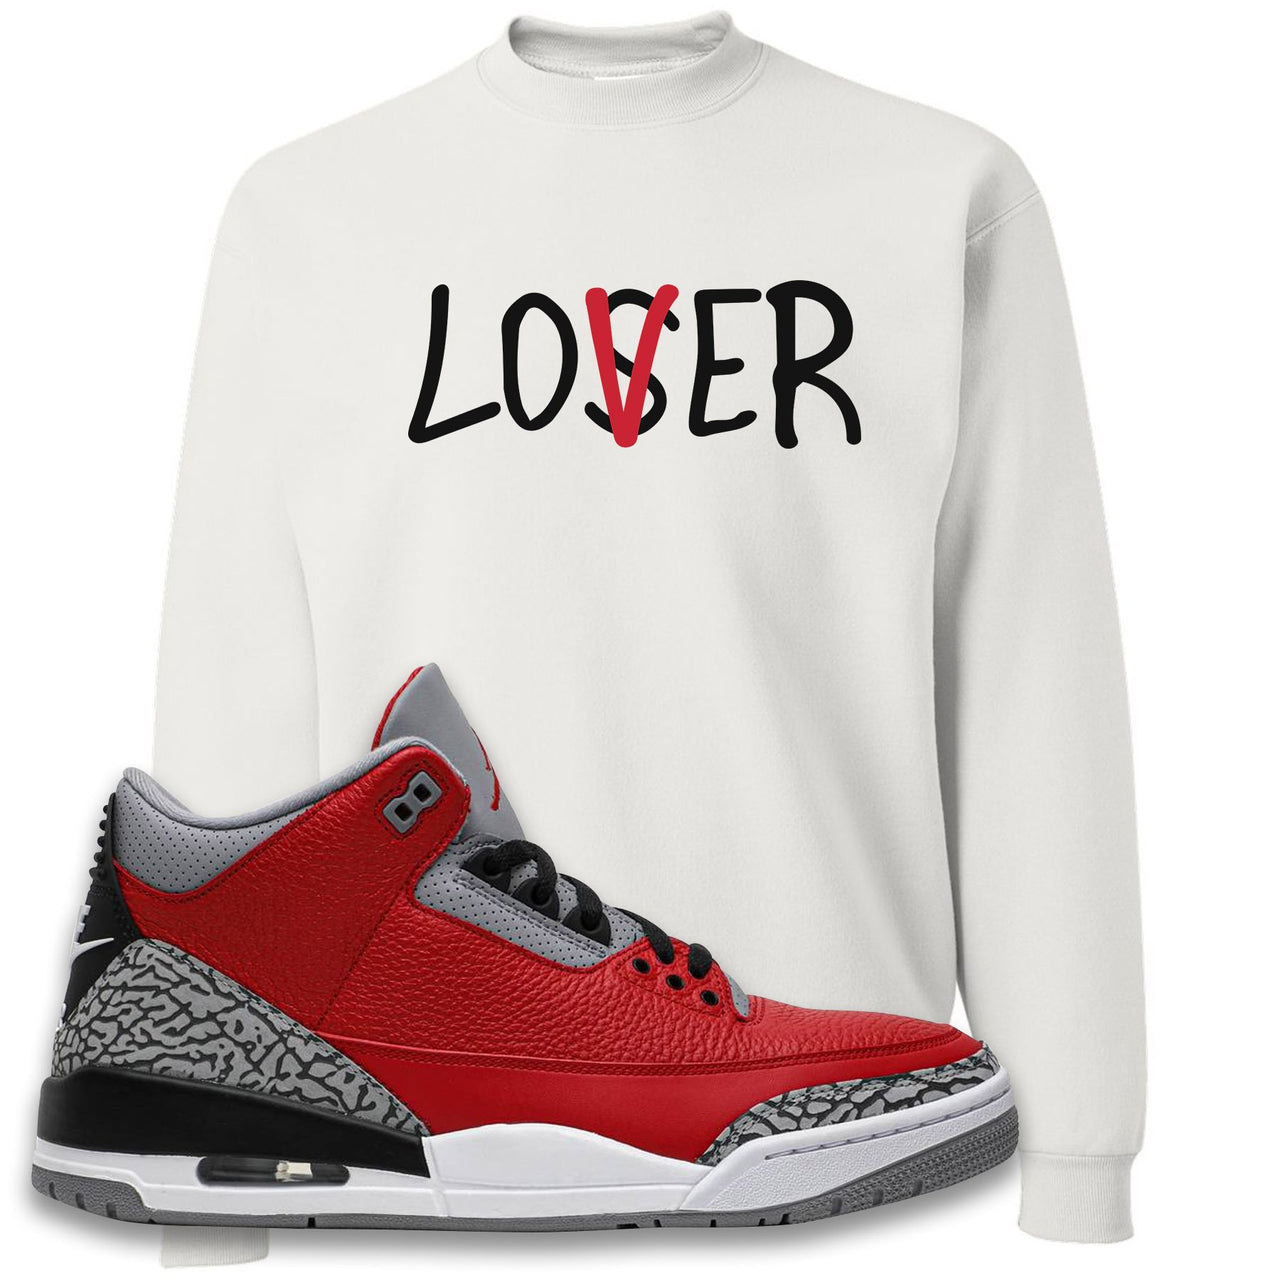 Chicago Exclusive Jordan 3 Red Cement Sneaker White Crewneck Sweatshirt | Crewneck to match Jordan 3 All Star Red Cement Shoes | Lover